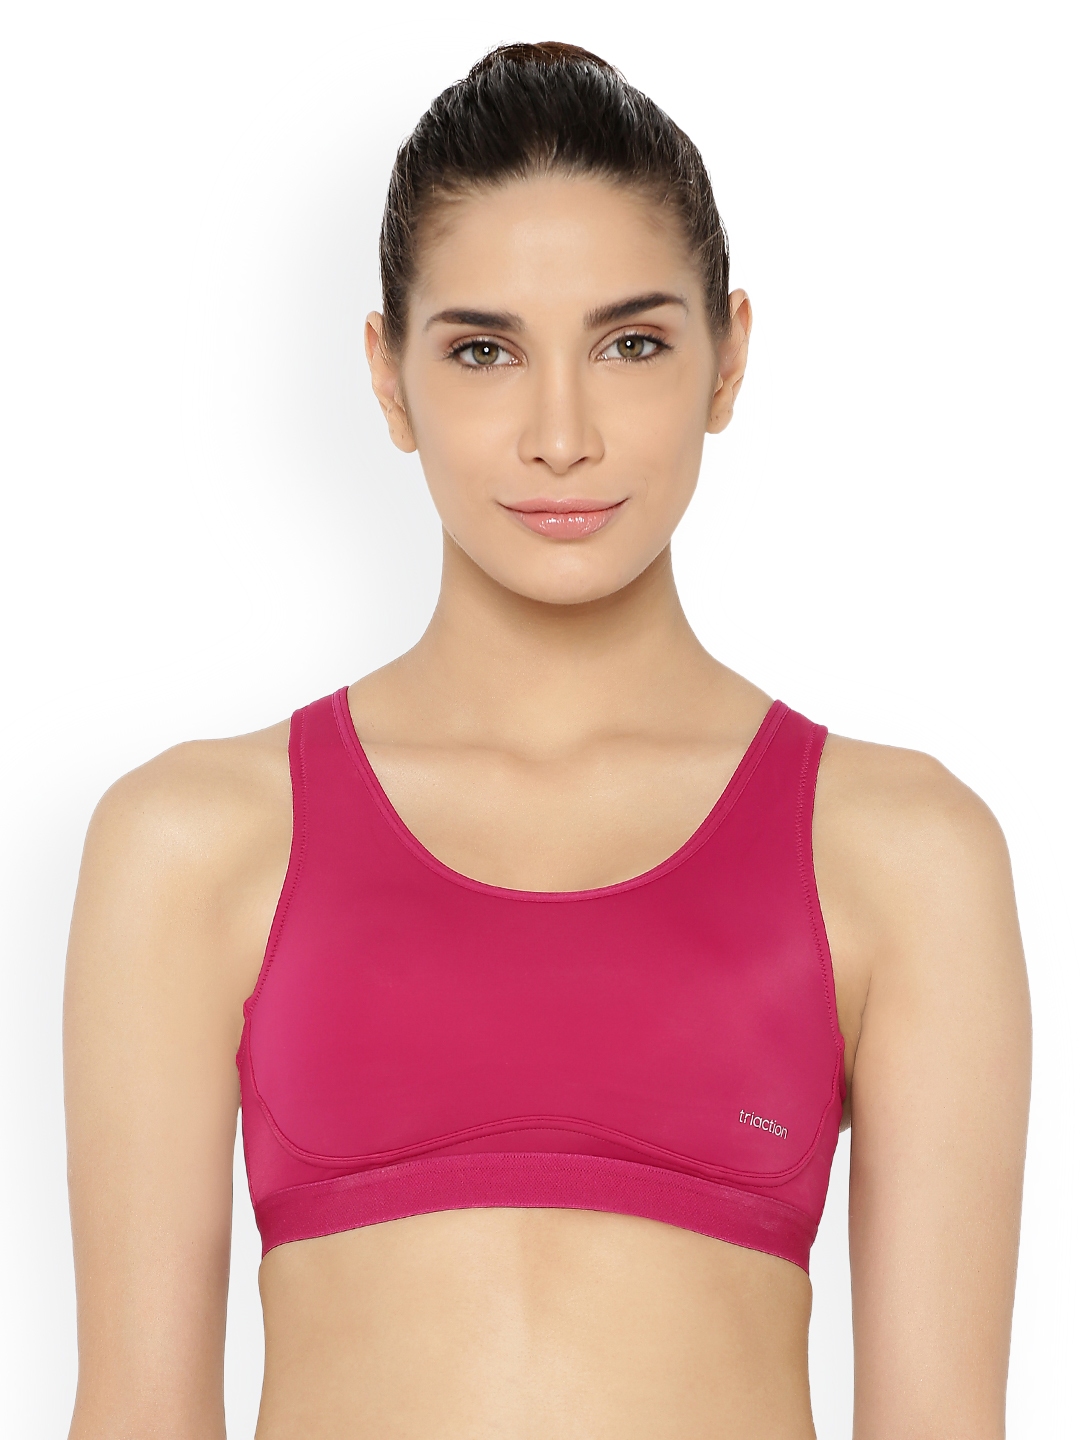 Buy Triumph Triaction 103 Top Triaction Padded Wireless Removable Padded  Racer Back High Bounce Control Sports Bra - Bra for Women 7761171